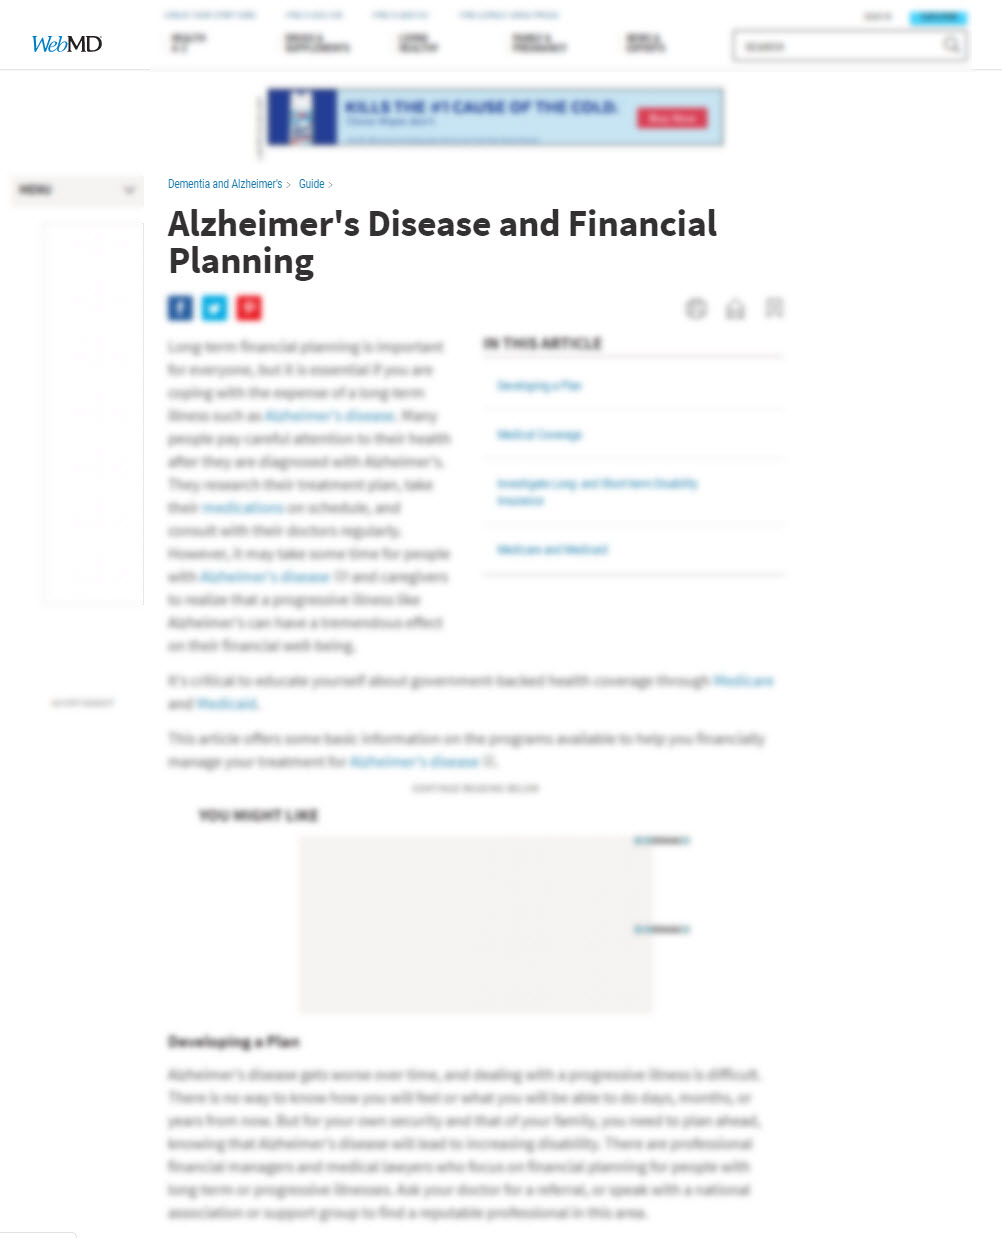 Alzheimer's Disease and Financial Planning